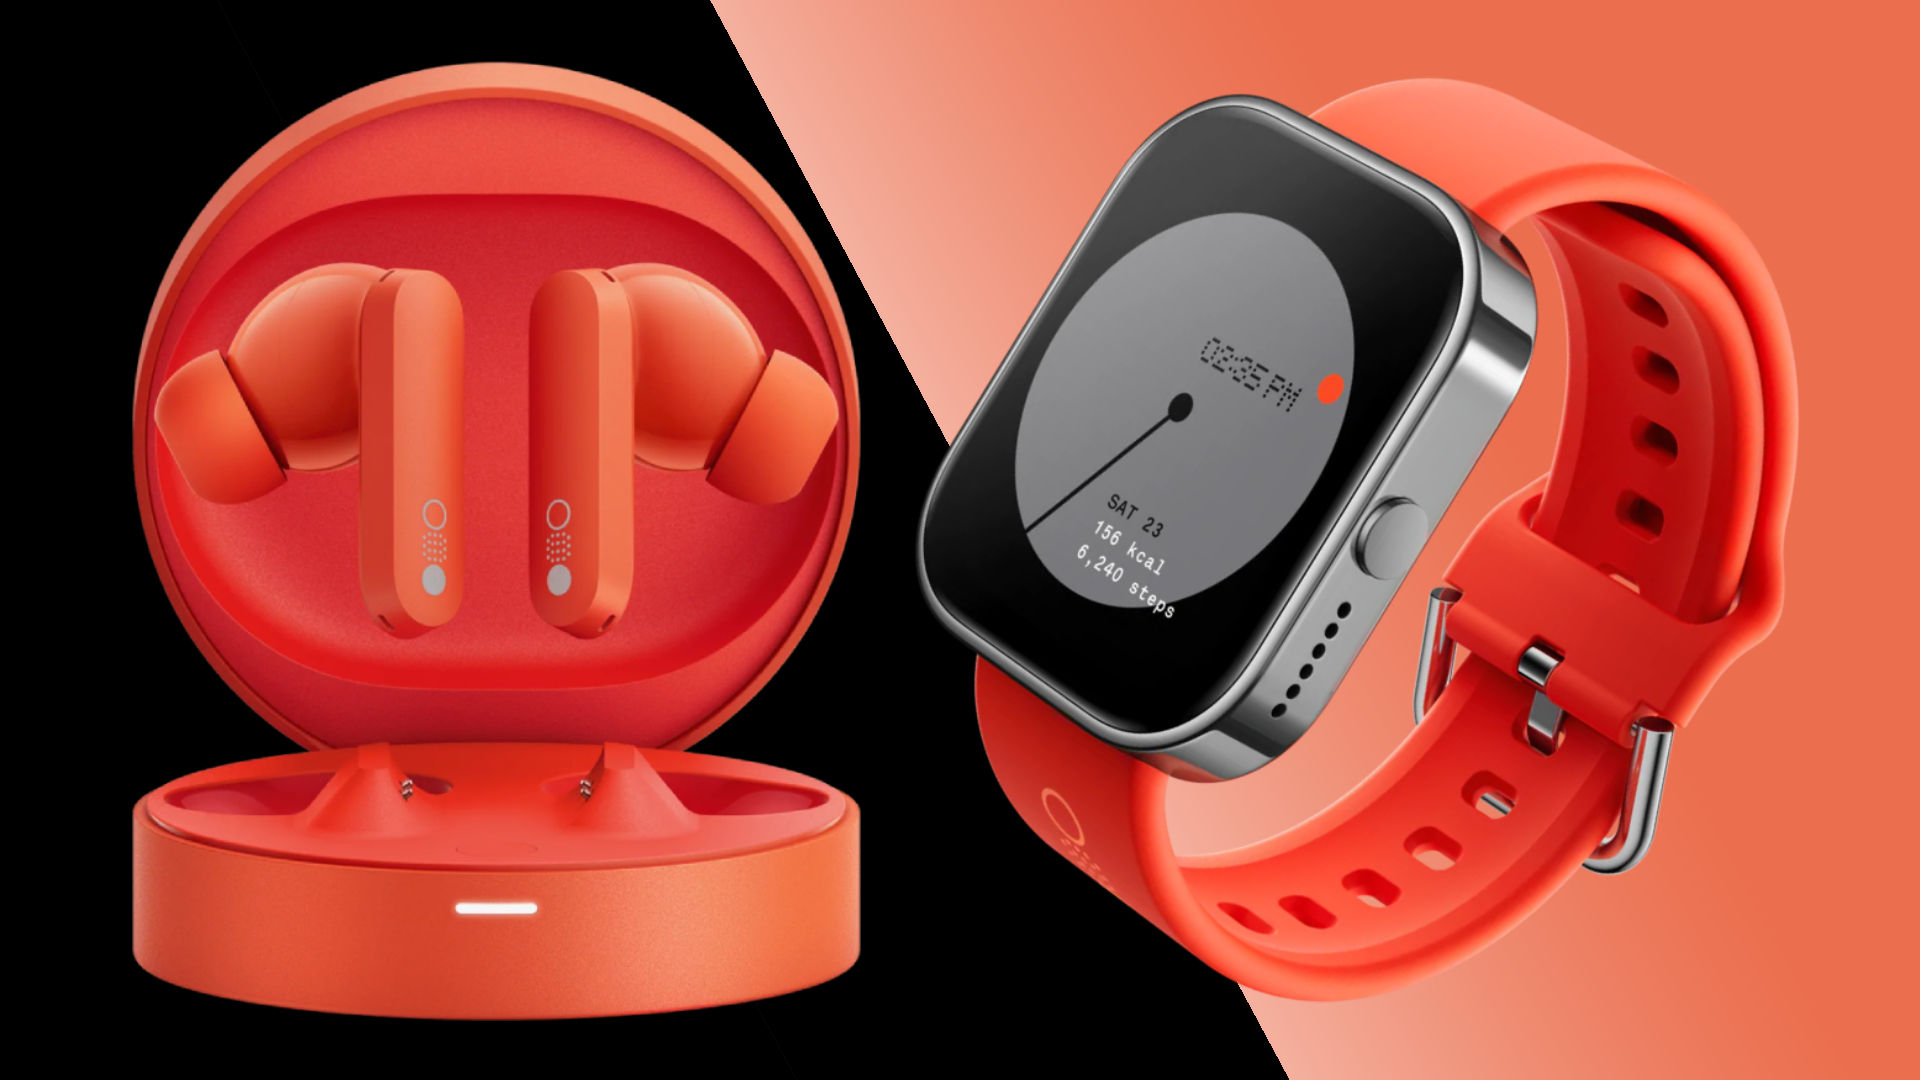 Images of New CMF by Nothing Smartwatch and Earbuds Leak